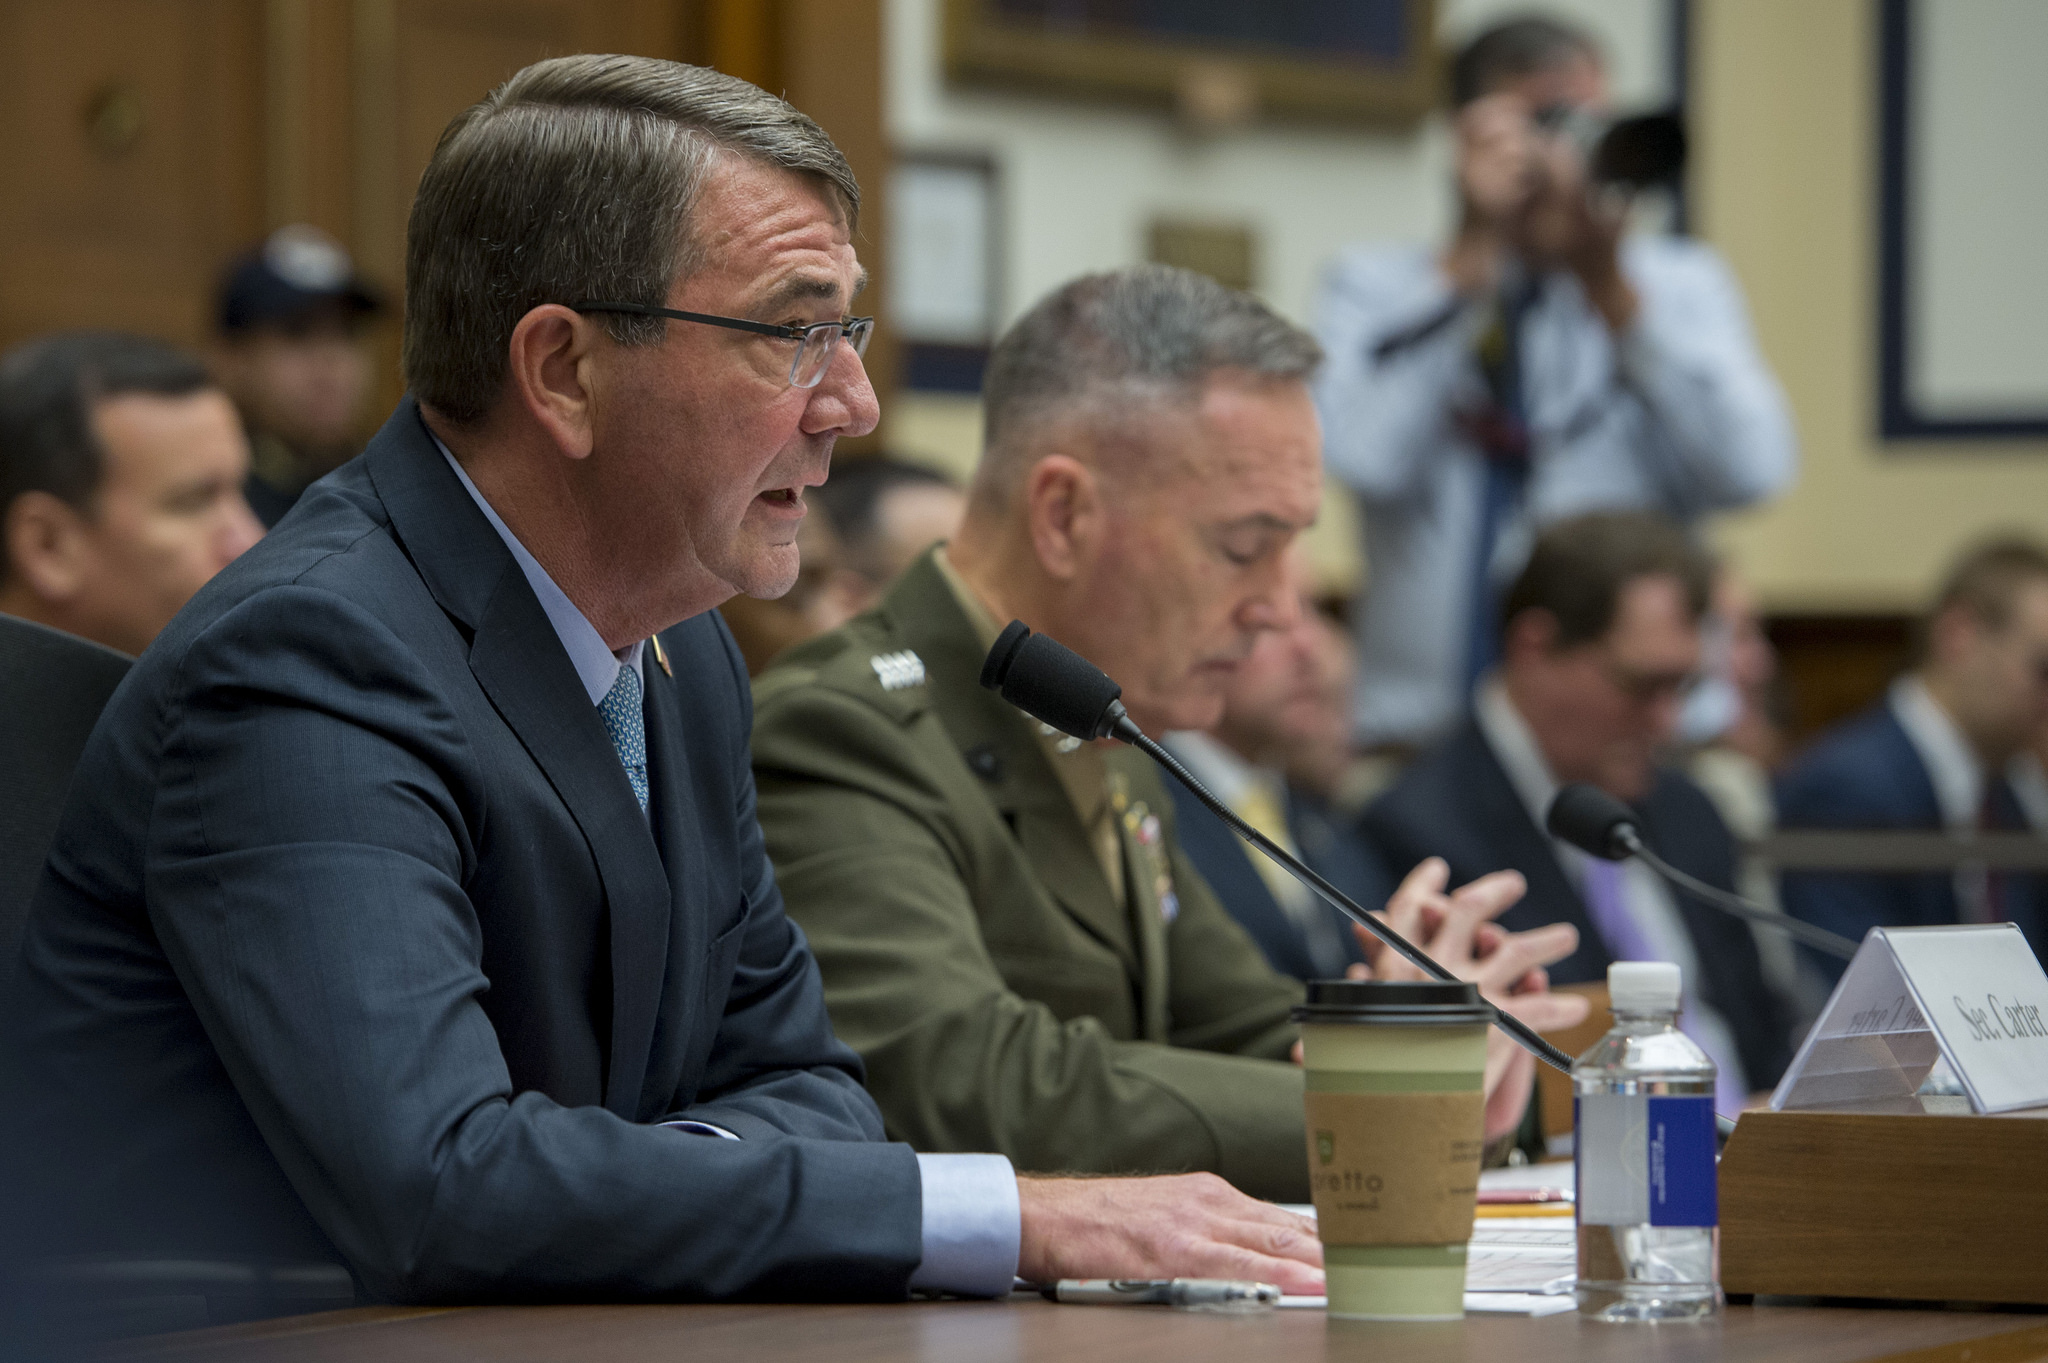 Defense Secretary Ash Carter, foreground, and Marine Corps Gen. Joseph F. Dunford Jr., chairman of the Joint Chiefs of Staff, testify before the House Armed Services Committee about U.S. strategy for Syria and Iraq in Washington, D.C. on Dec. 1, 2015. DoD Photo